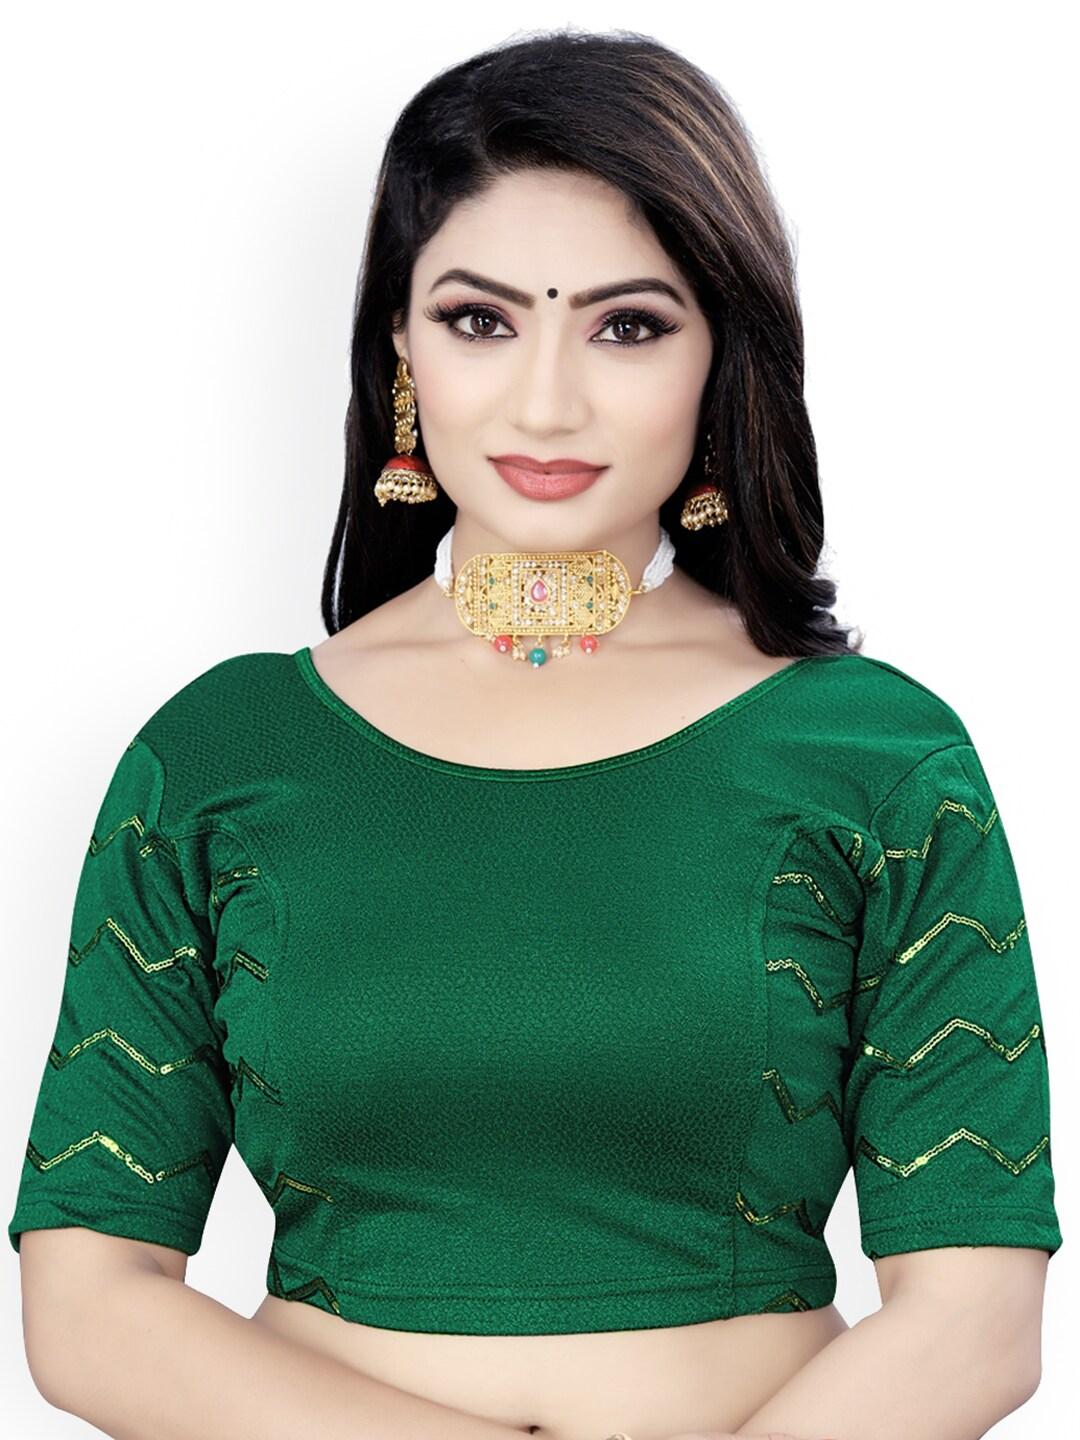 HIMRISE Embriodered Sequinned Saree Blouse